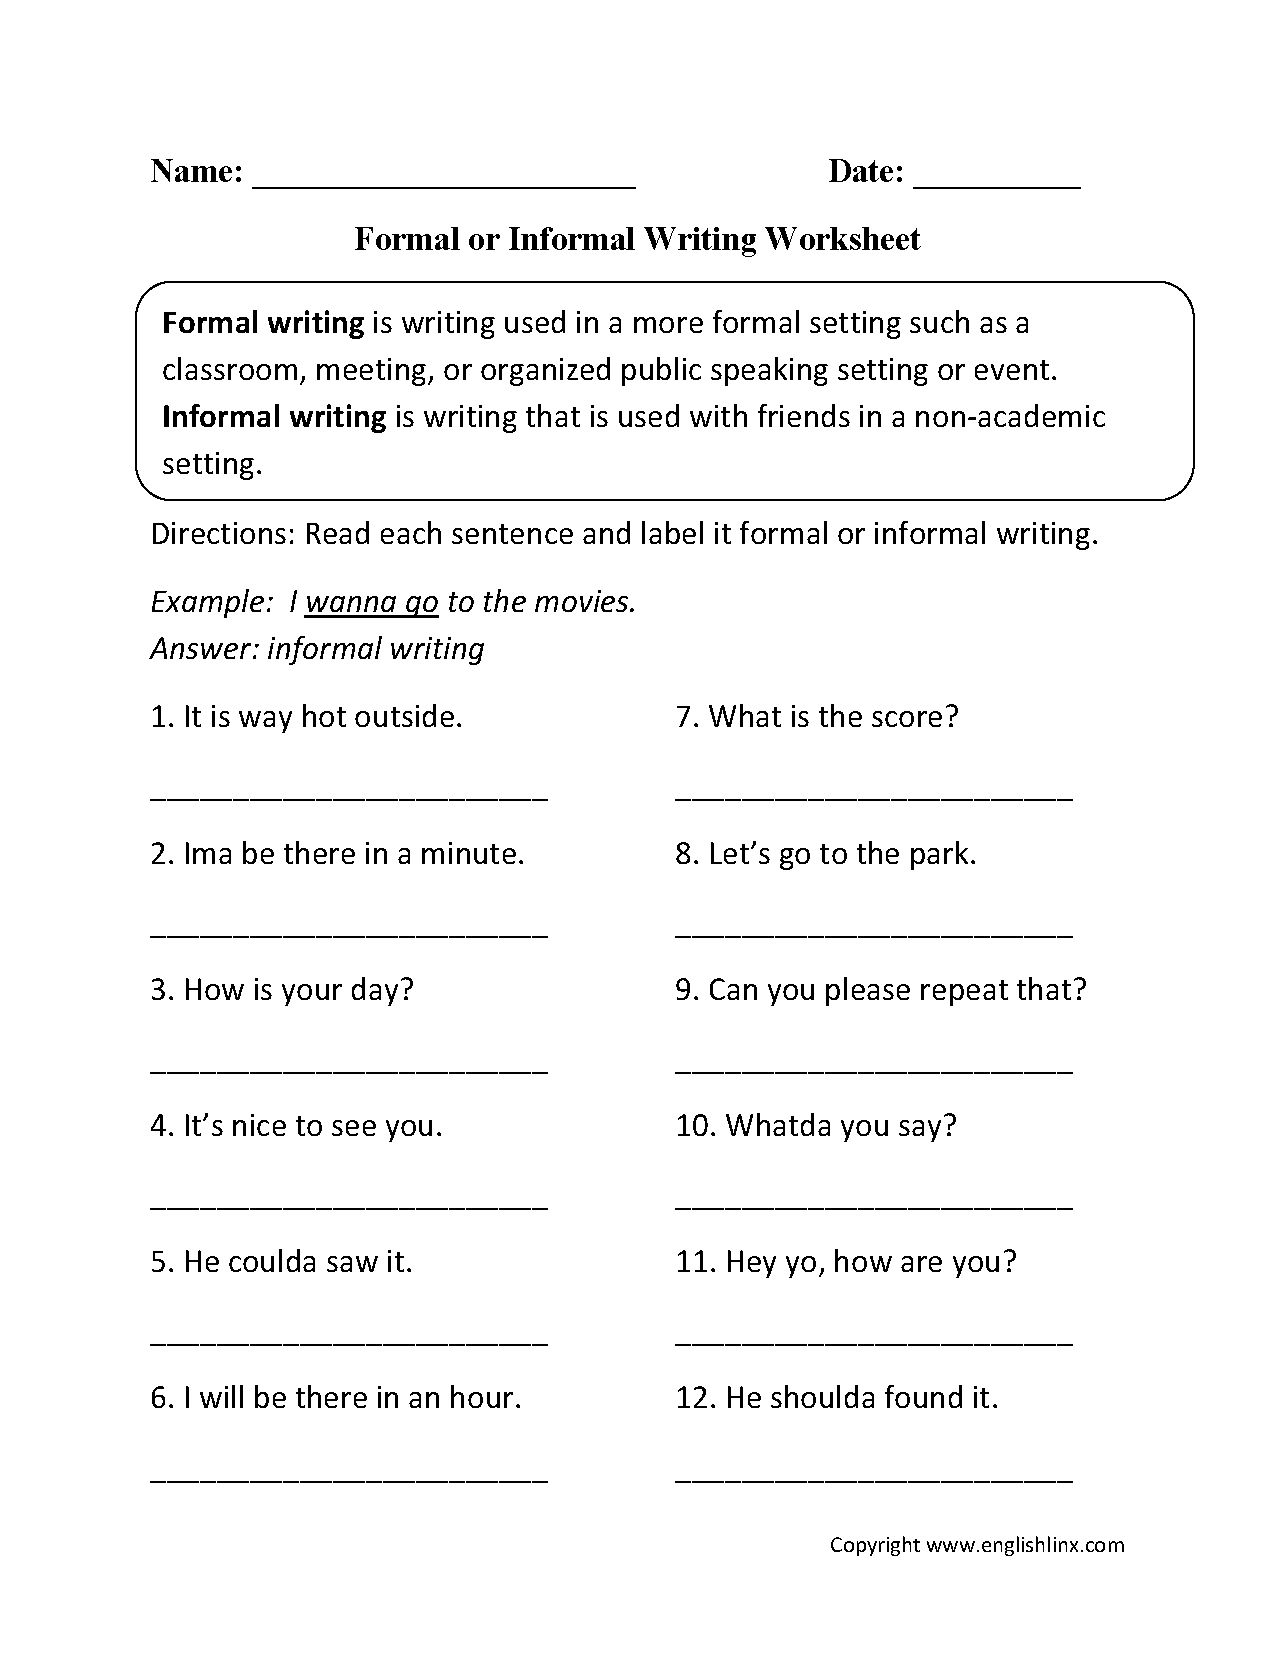 writing for beginners worksheets elegant formal or informal writing worksheet critical thinking of writing for beginners